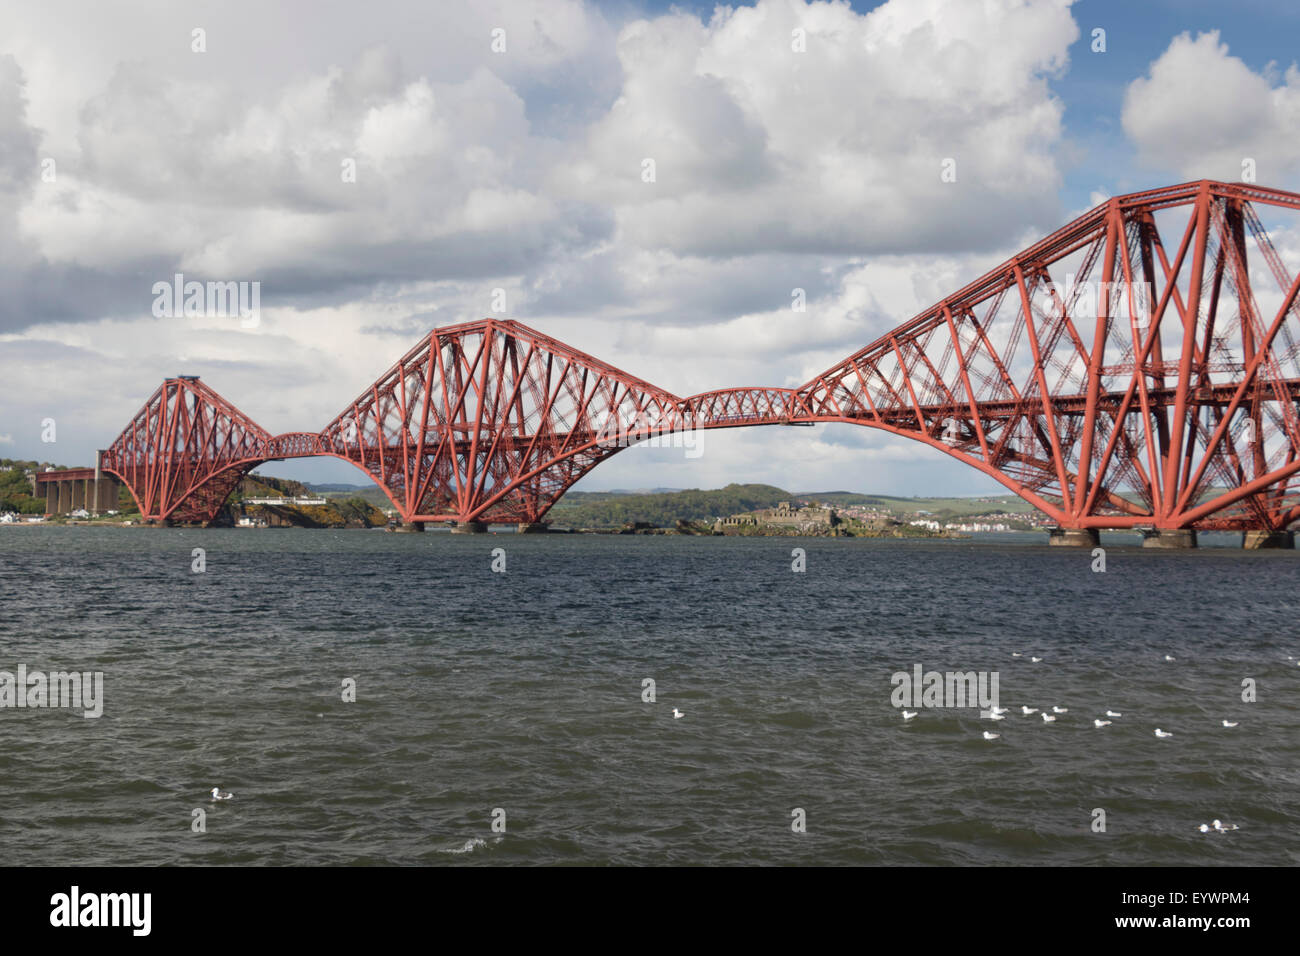 Le Forth Rail Bridge, UNESCO World Heritage Site, Firth of Forth, Ecosse, Royaume-Uni, Europe Banque D'Images